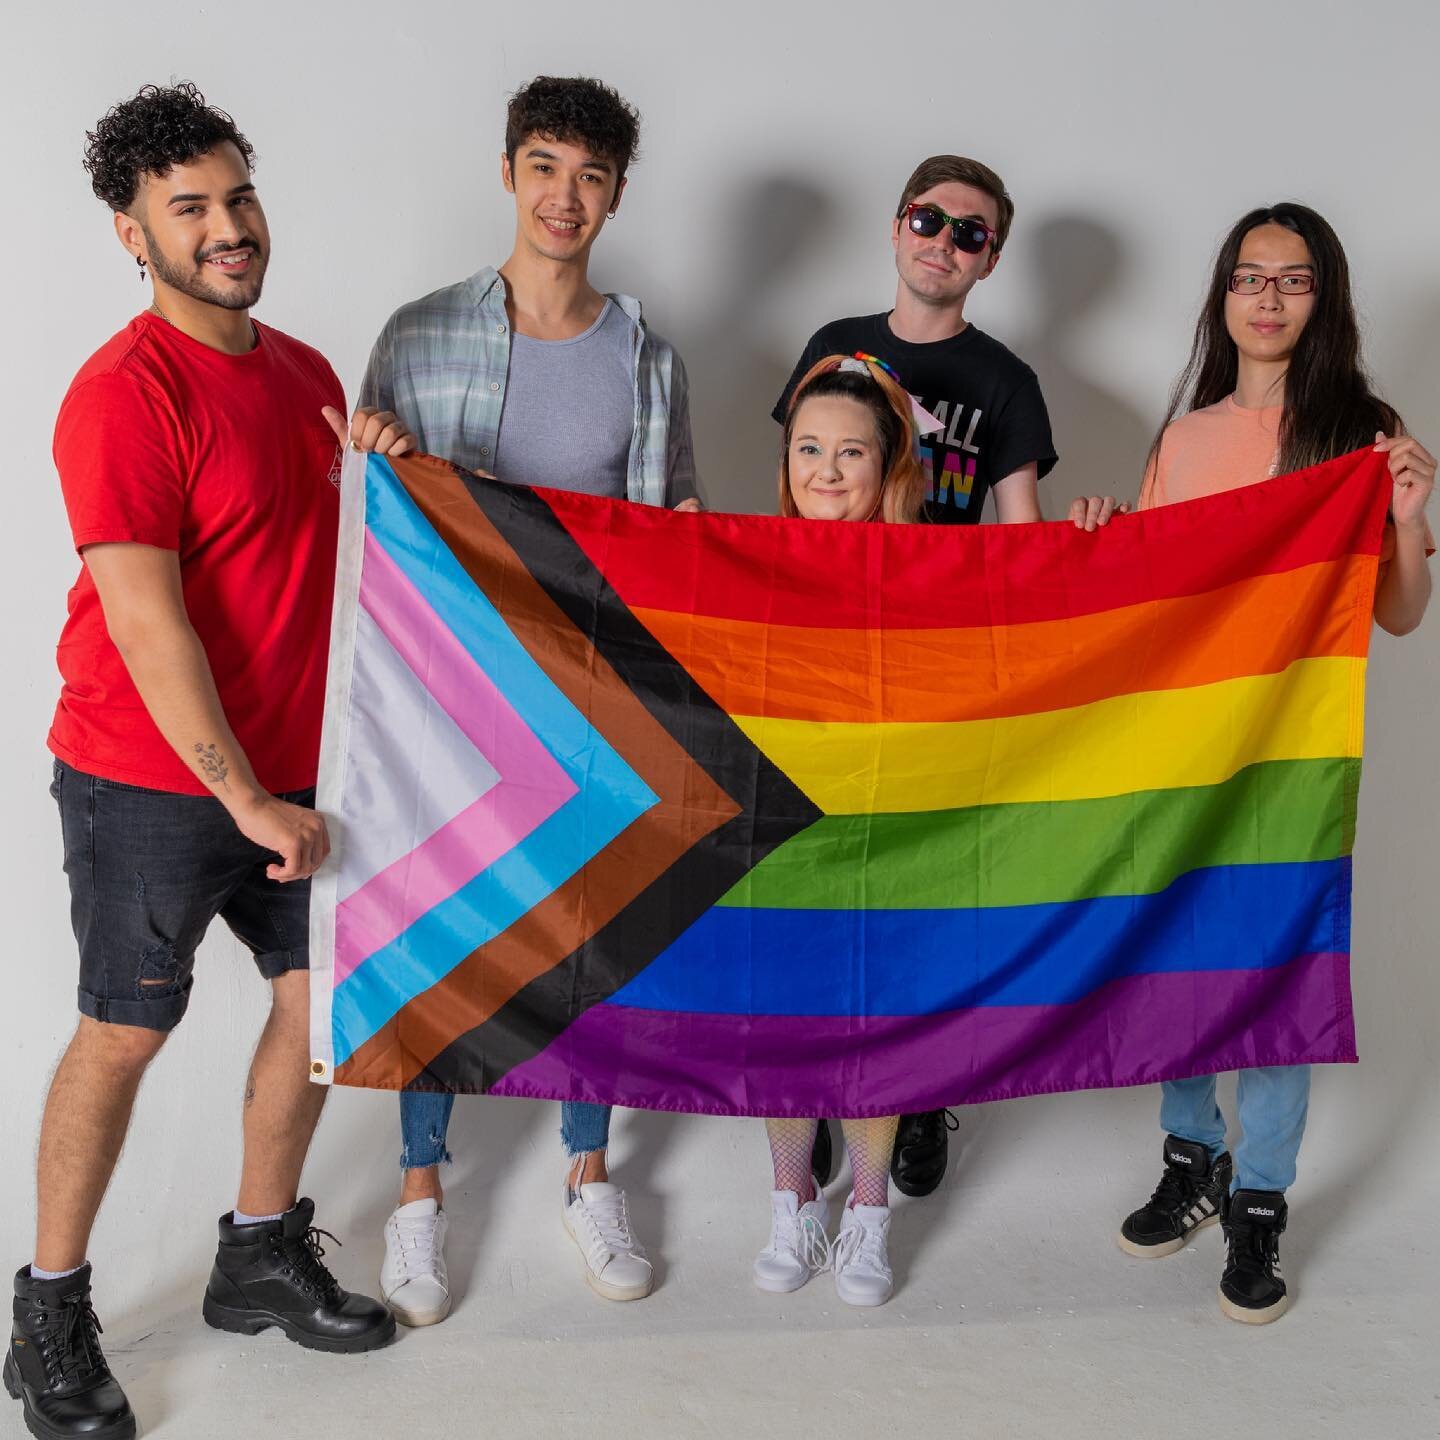 Thank you to all the wonderful people who participated in my pride shoot yesterday, photographers and models alike. Another special thanks to the Orlando photography studio for allowing us to use their space. If you&rsquo;re in need of a studio space